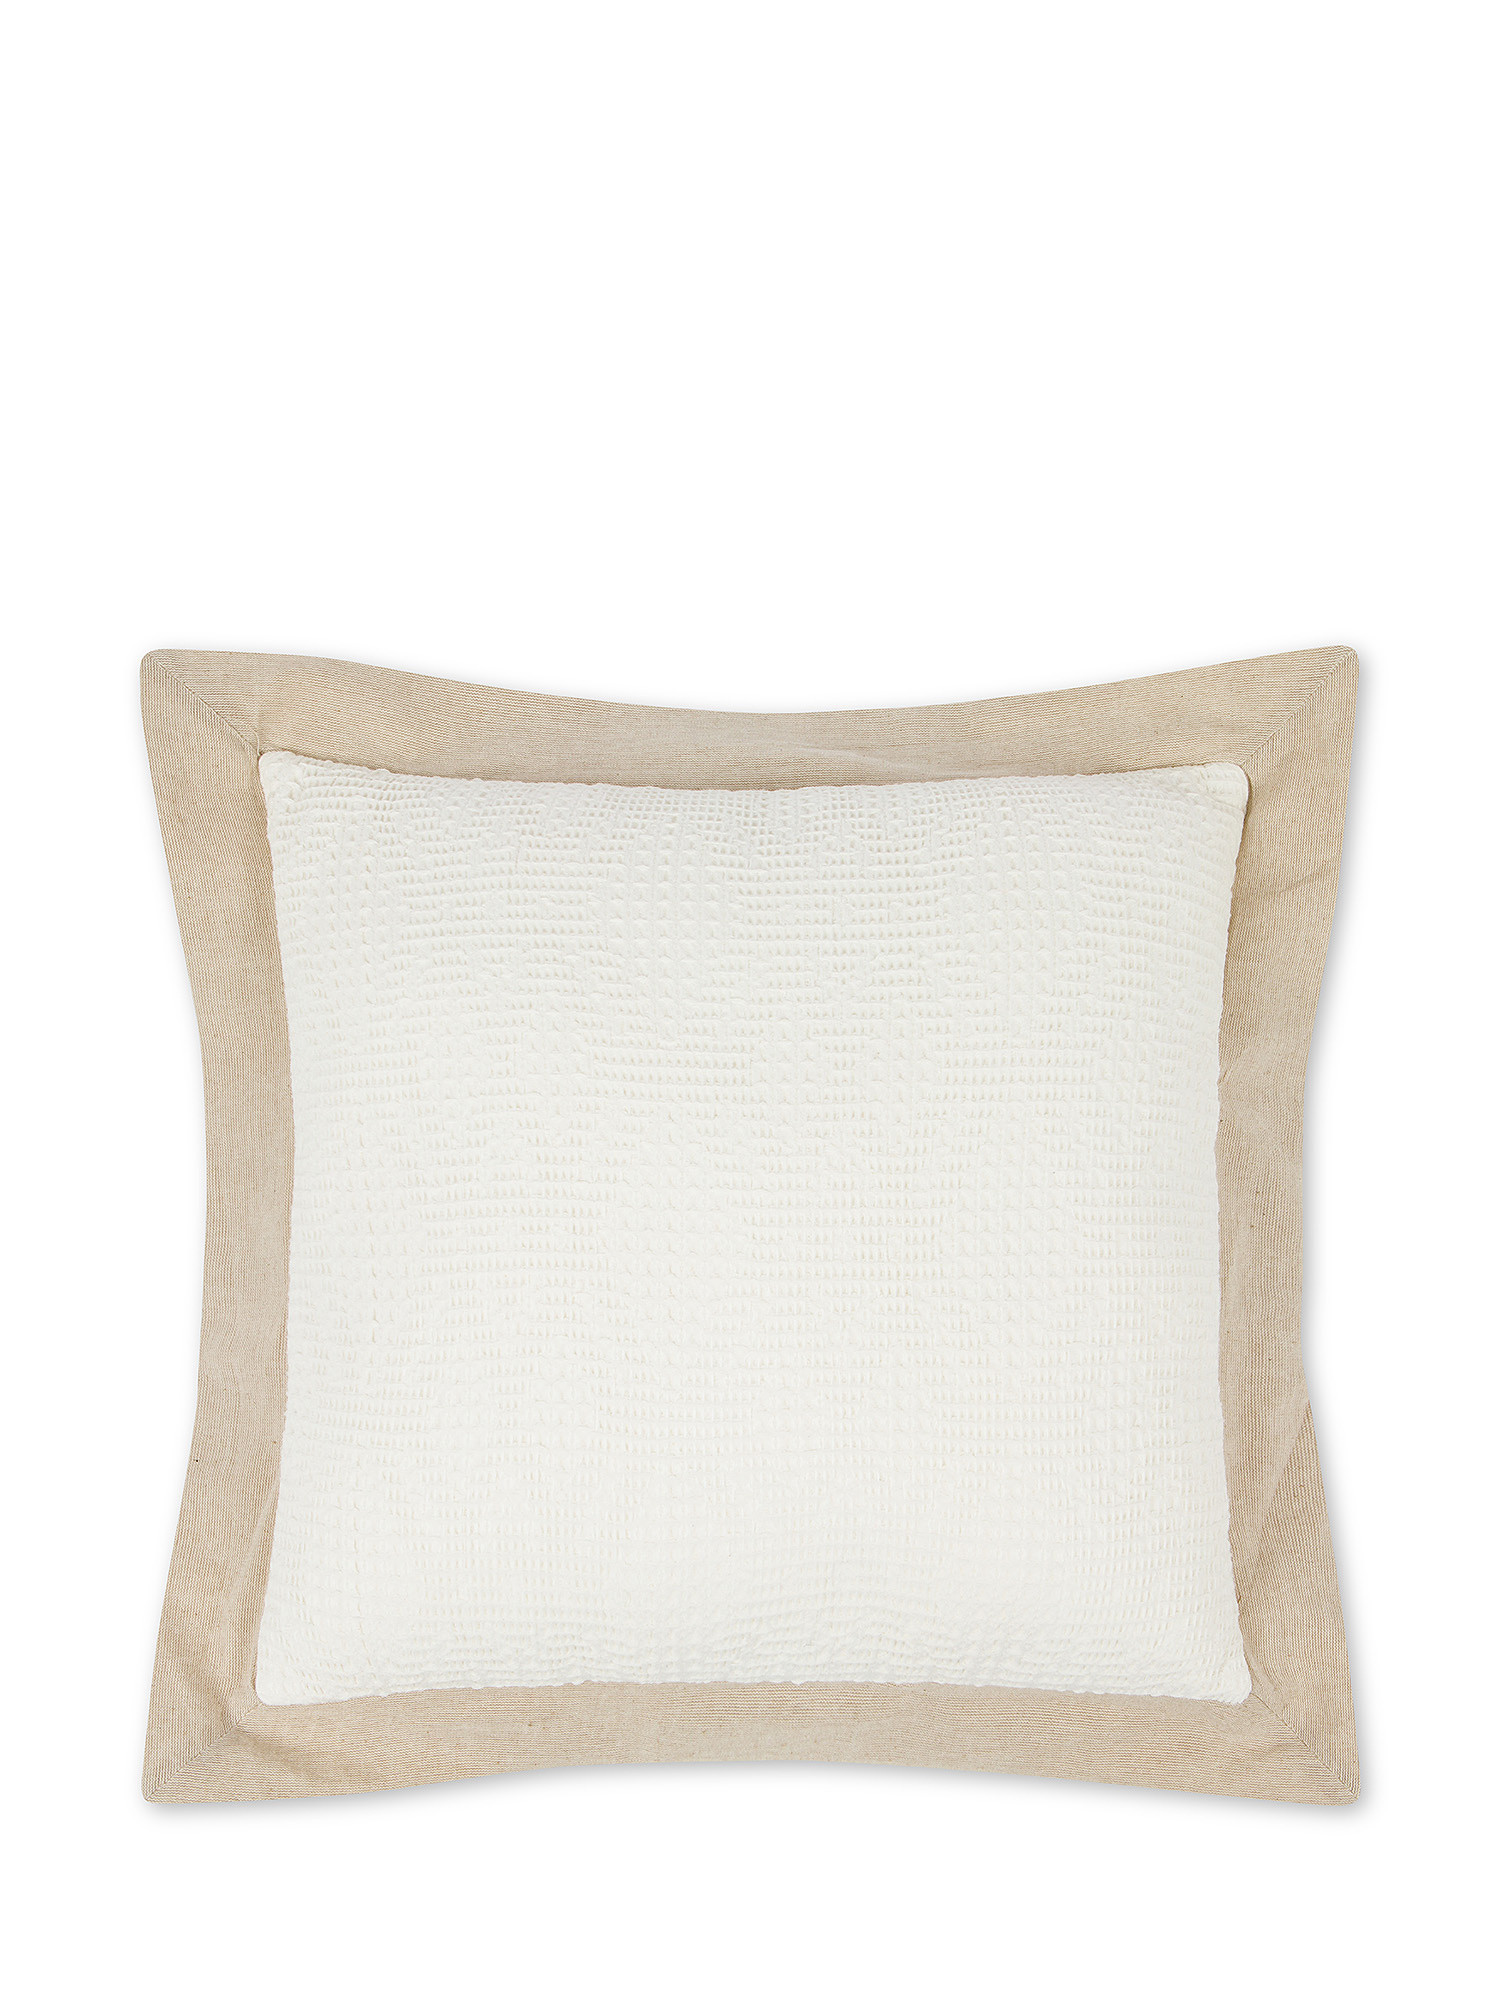 45x45 cm cushion in honeycomb weave cotton, White, large image number 0